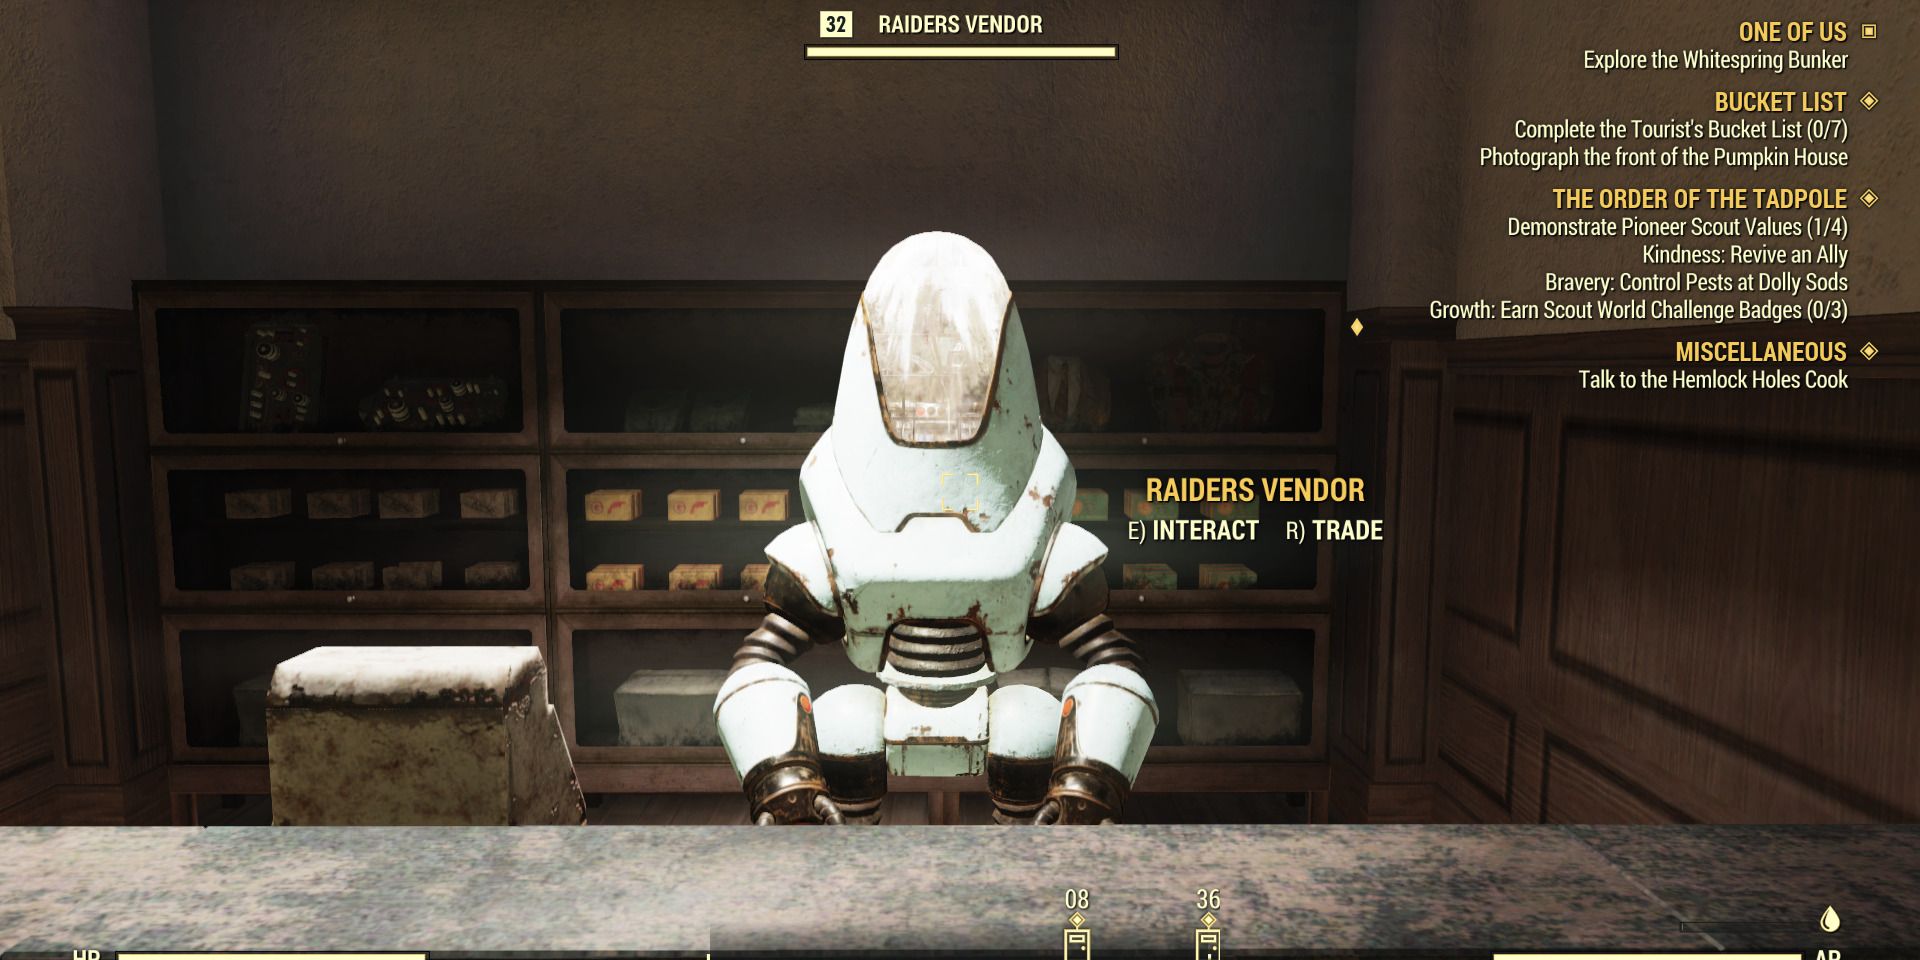 Image of the raiders vendor in the whitespring mall in Fallout 76